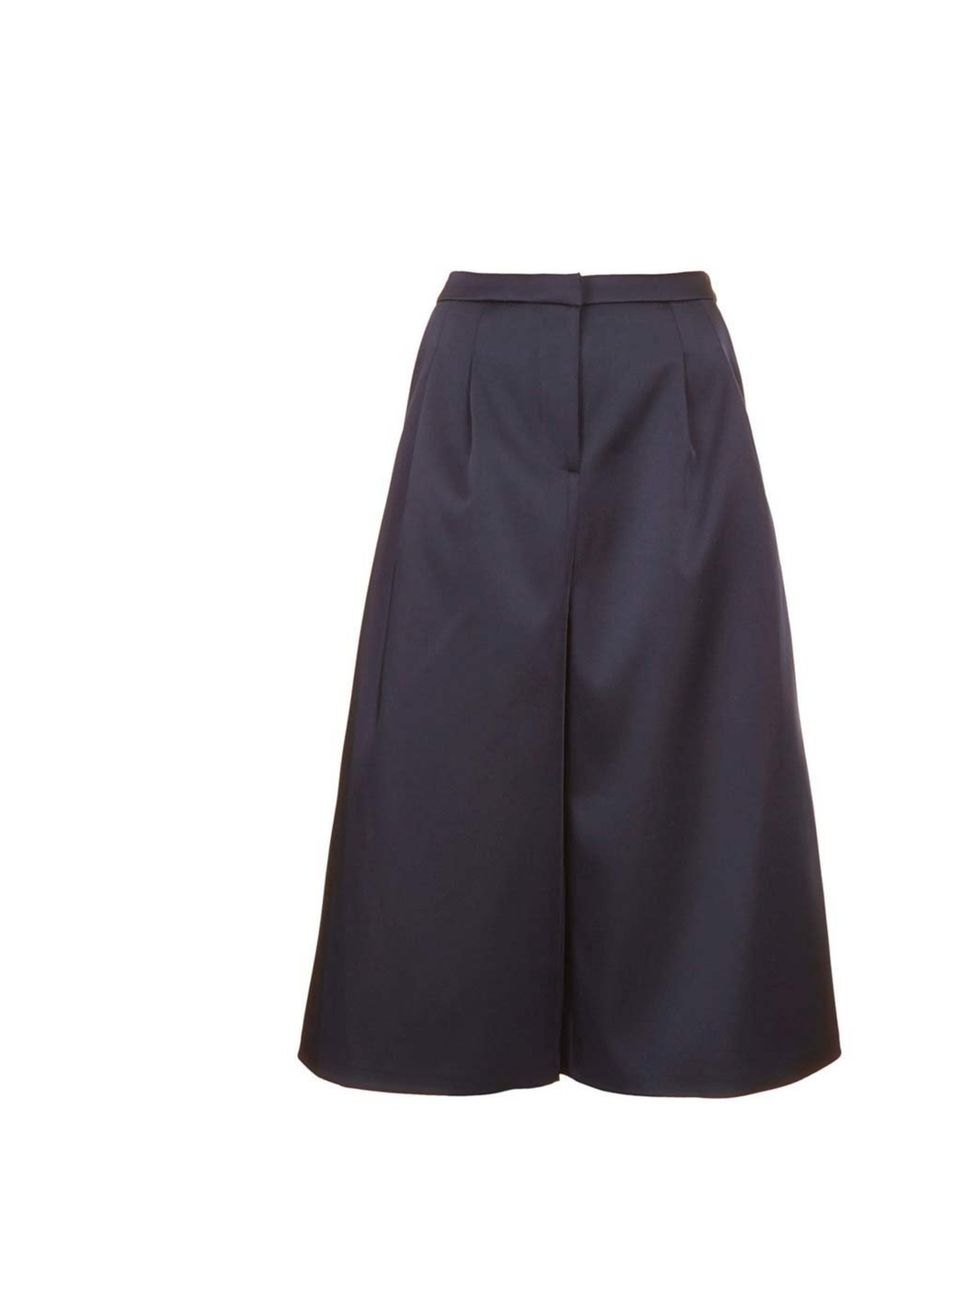 <p>Culottes are set to be a big trend on the high street for s/s 2014, and this navy satin pair is our pick of the bunch.</p><p><a href="http://www.topshop.com/en/tsuk/product/new-in-this-week-2169932/new-in-this-week-493/premium-satin-culottes-2567353?bi